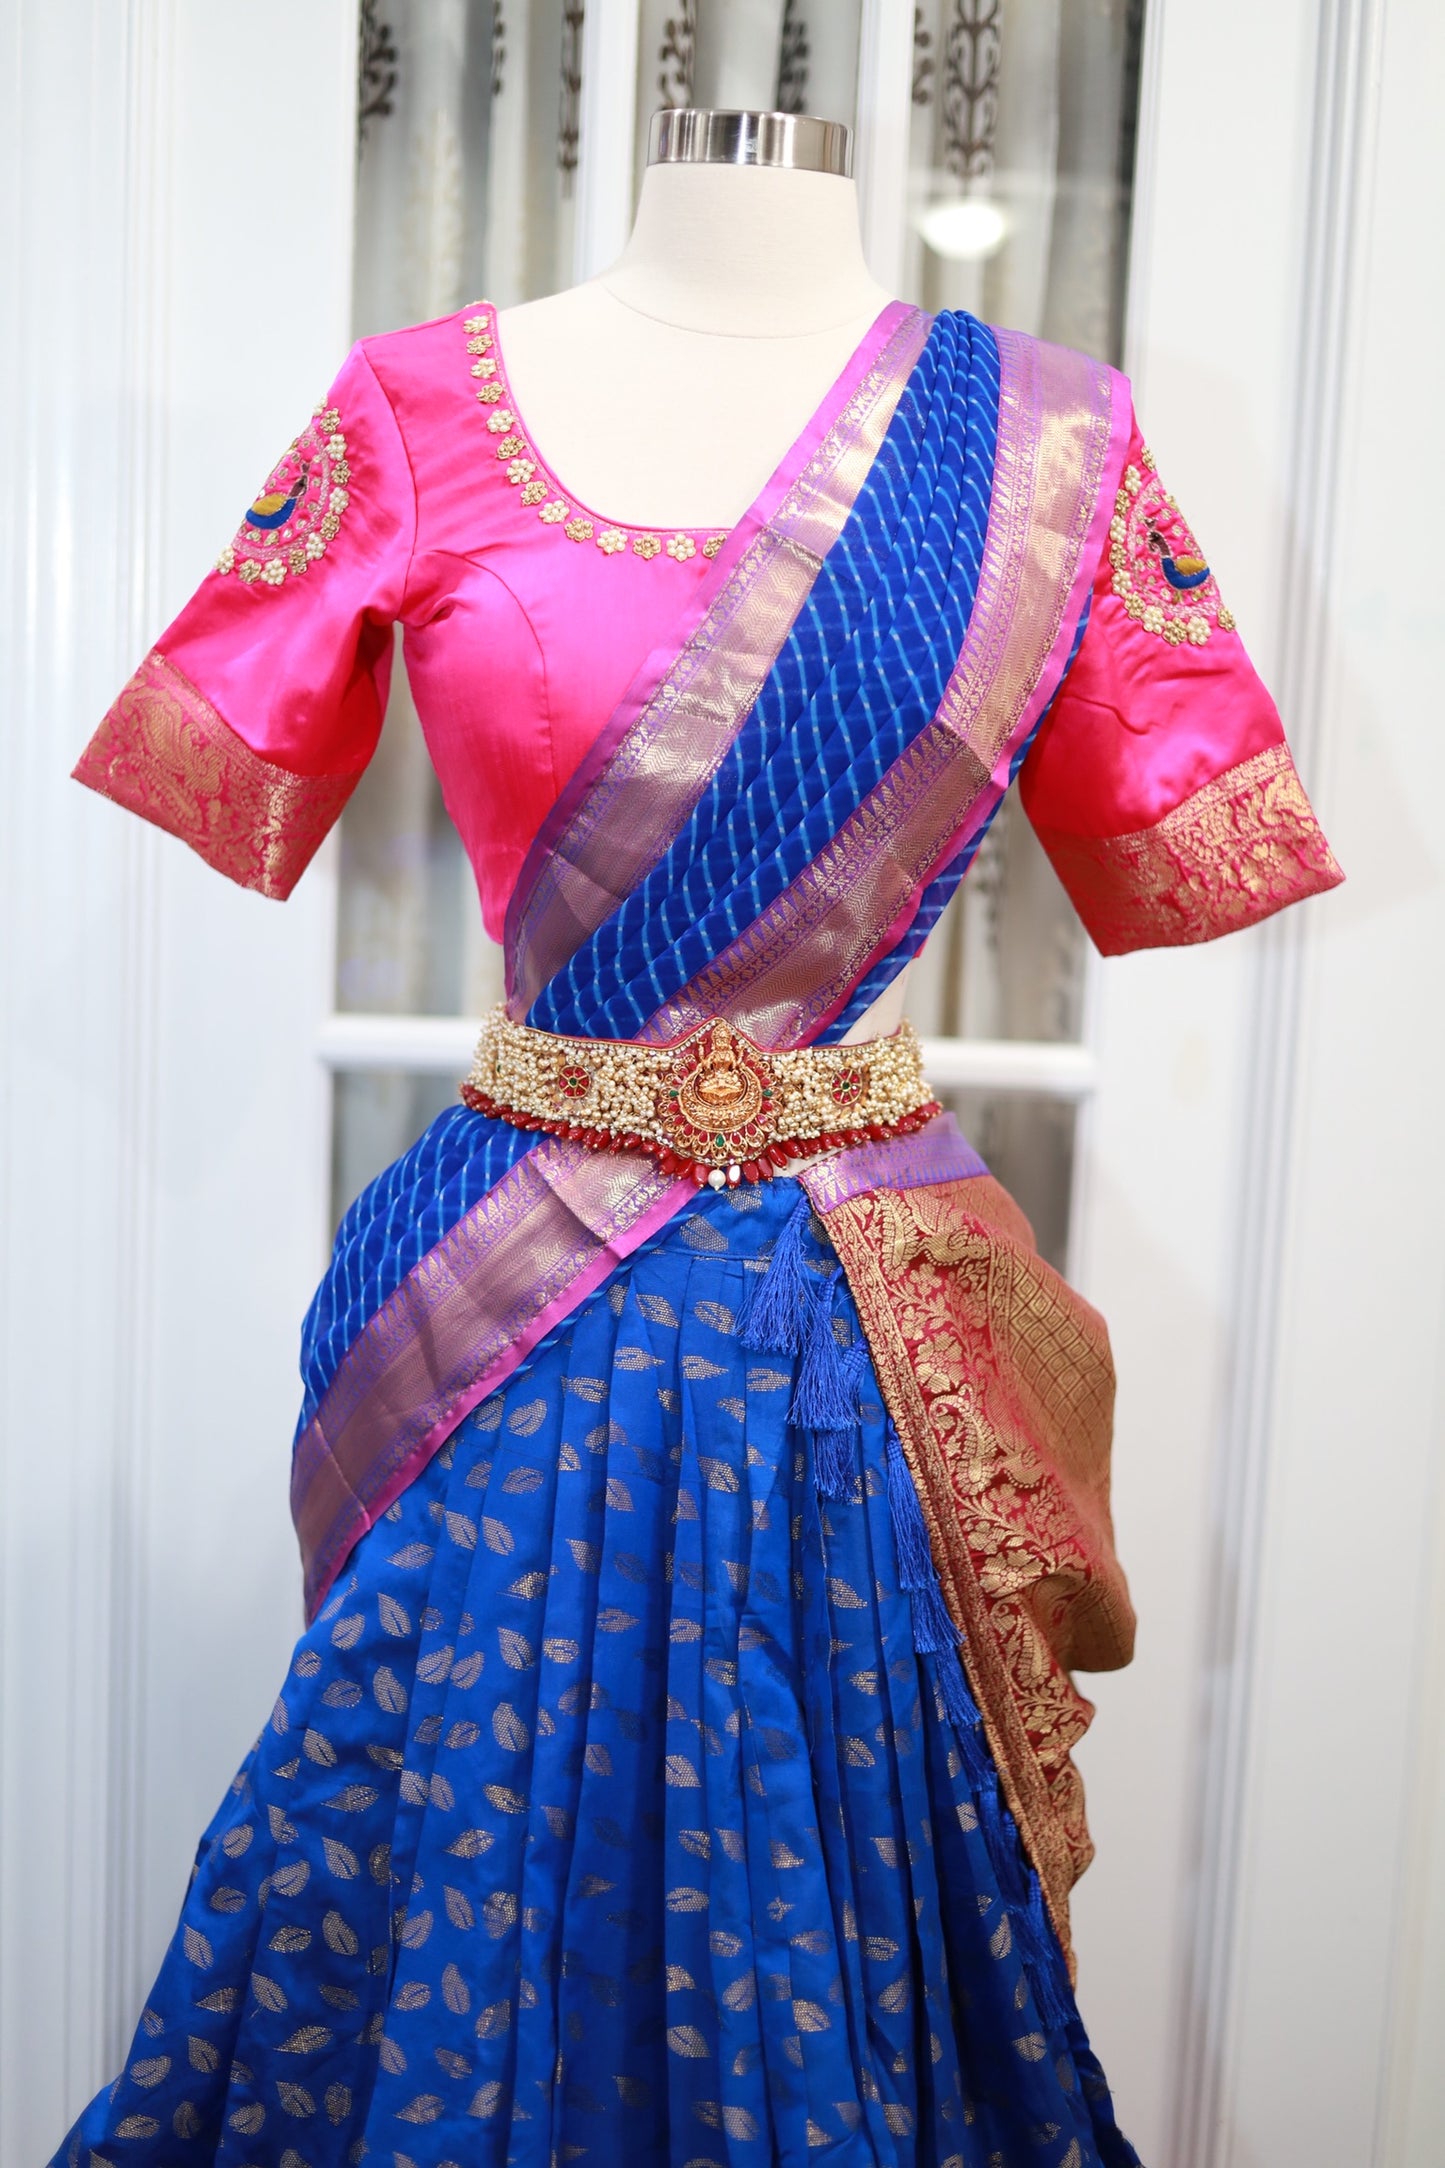 Traditional Half saree/langa voni size 36 with Maggam work ready to ship